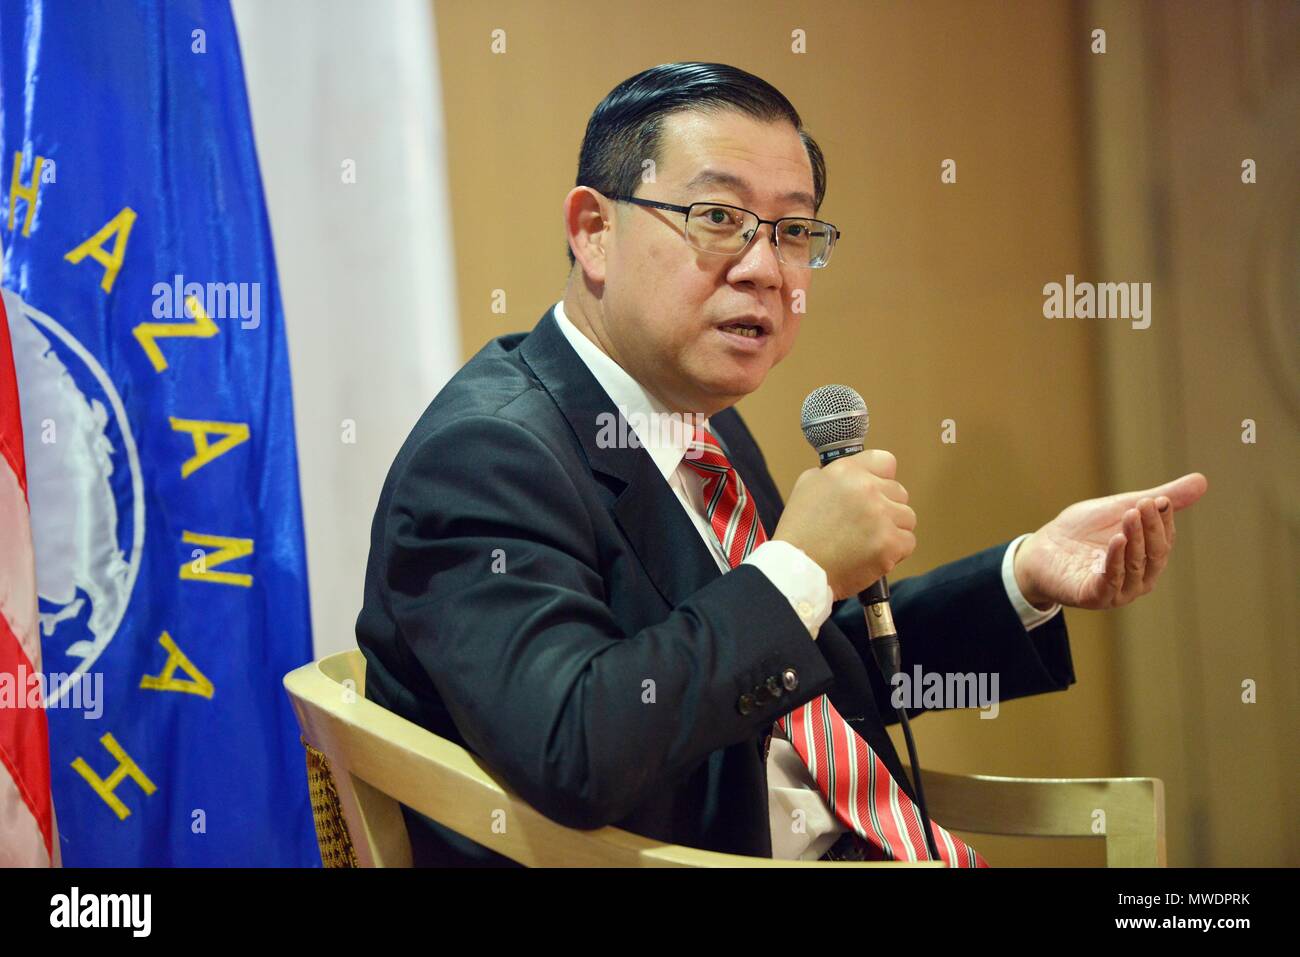 Putrajaya, Malaysia. 1st June, 2018. Malaysian Finance Minister Lim Guan Eng speaks during a briefing with foreign media at the Ministry of Finance in Putrajaya, Malaysia, June 1, 2018. Malaysian Finance Minister Lim Guan Eng said on Friday that terminating the high speed rail (HSR) link between Kuala Lumpur and Singapore does not mean it cannot be revisited in the future, days after Prime Minister Mahathir Mohamad axed the project citing high debt level. Credit: Chong Voon Chung/Xinhua/Alamy Live News Stock Photo